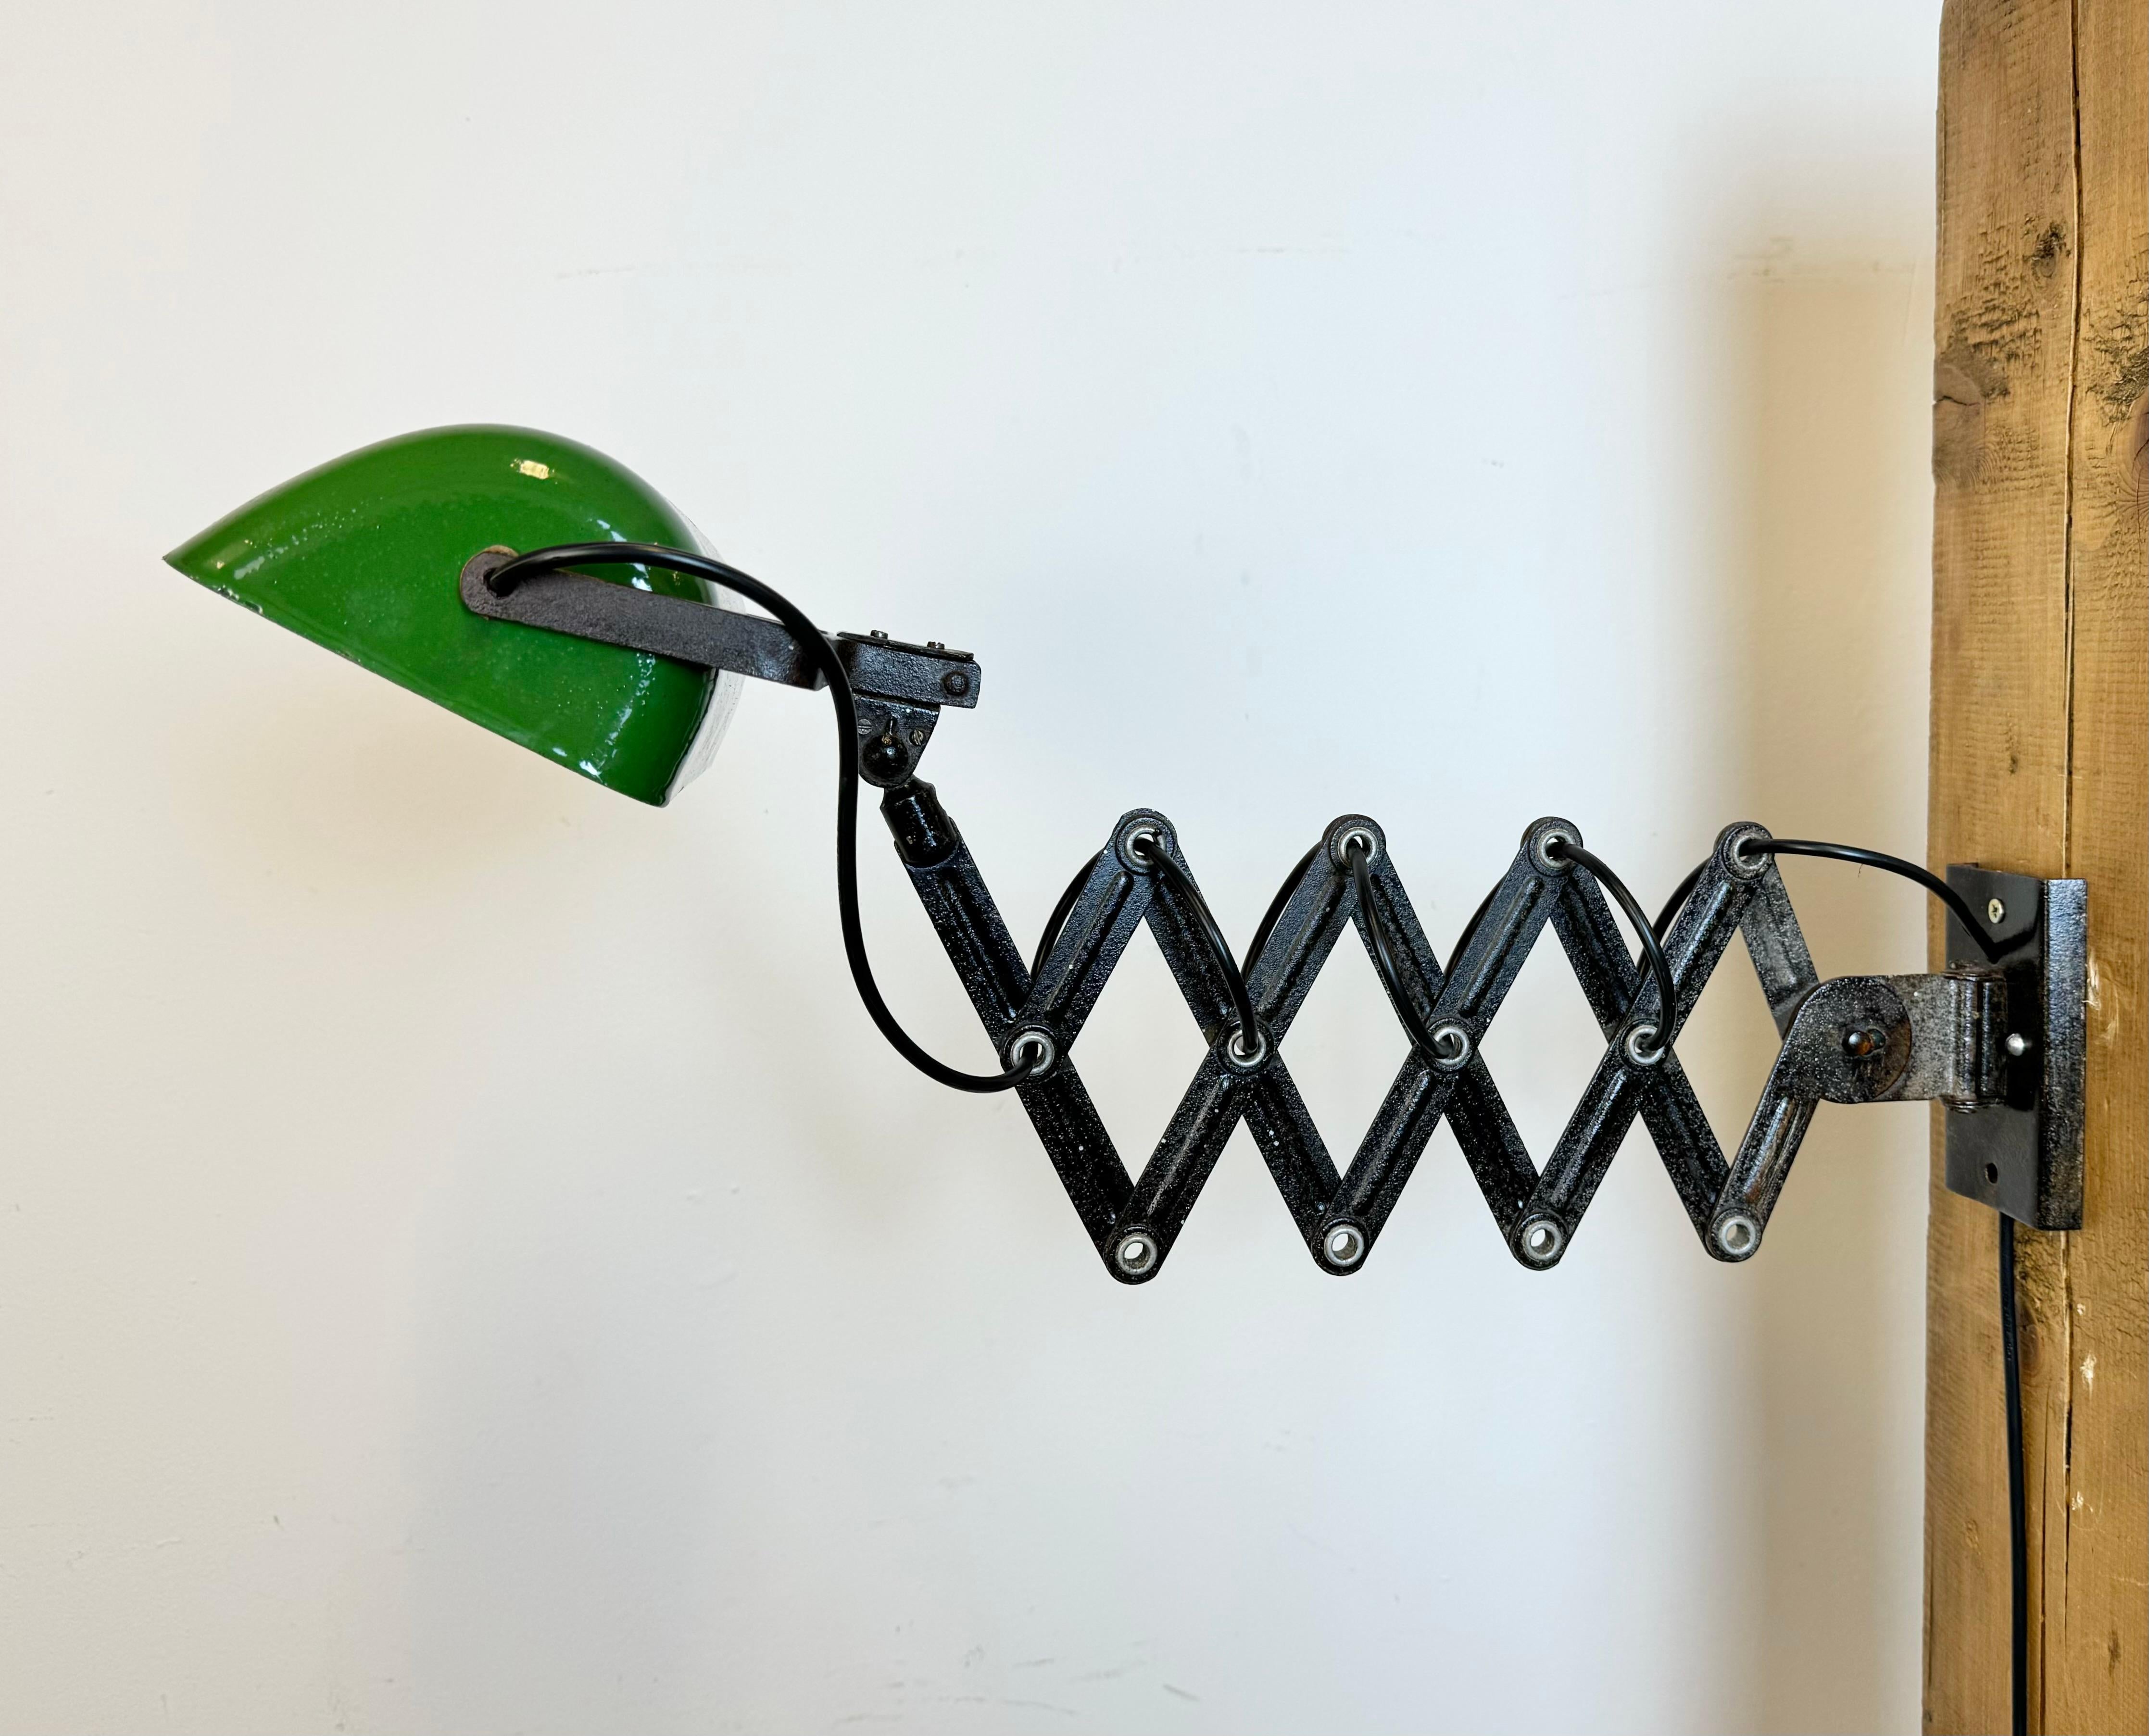 - Industrial scissor lamp was produced in former Czechoslovakia during the 1950s
- The lamp has a green enamel metal shade, white interior
- The black scissor arm is extendable and can be turned sideways
- Original porcelain socket with switch